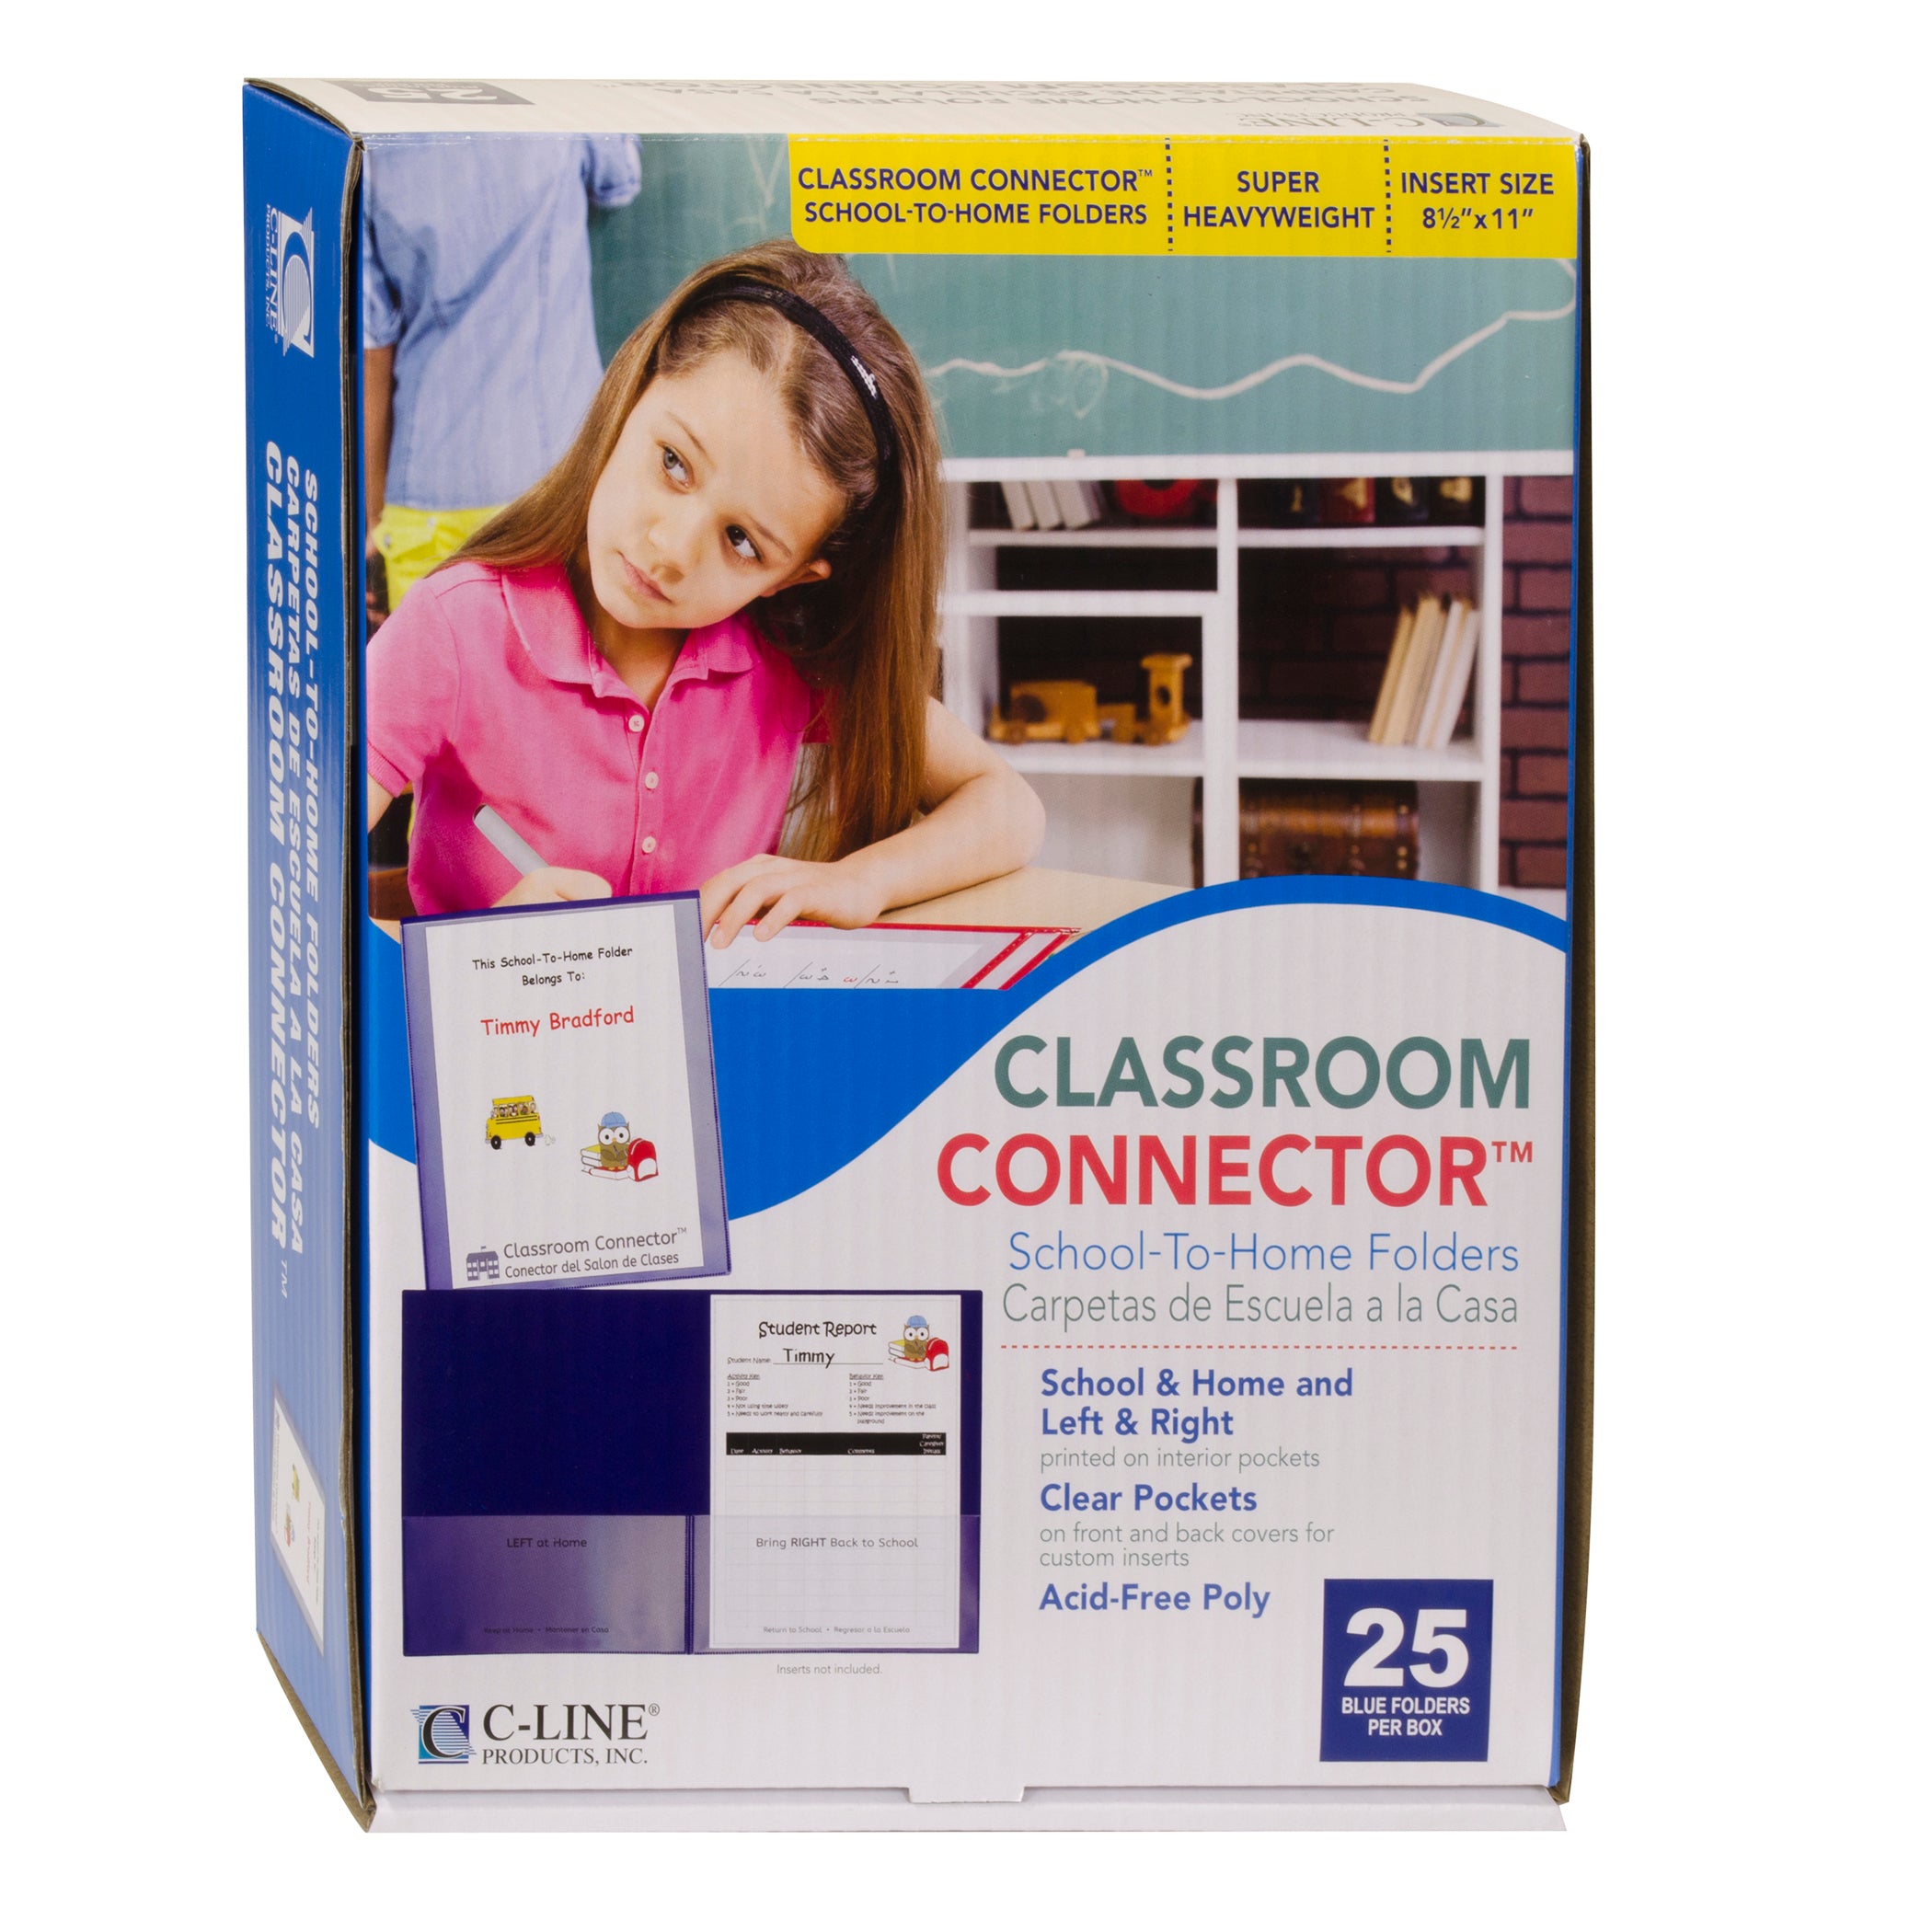 Classroom Connector™ School-To-Home Folders, Blue, Box of 25 - A1 School Supplies